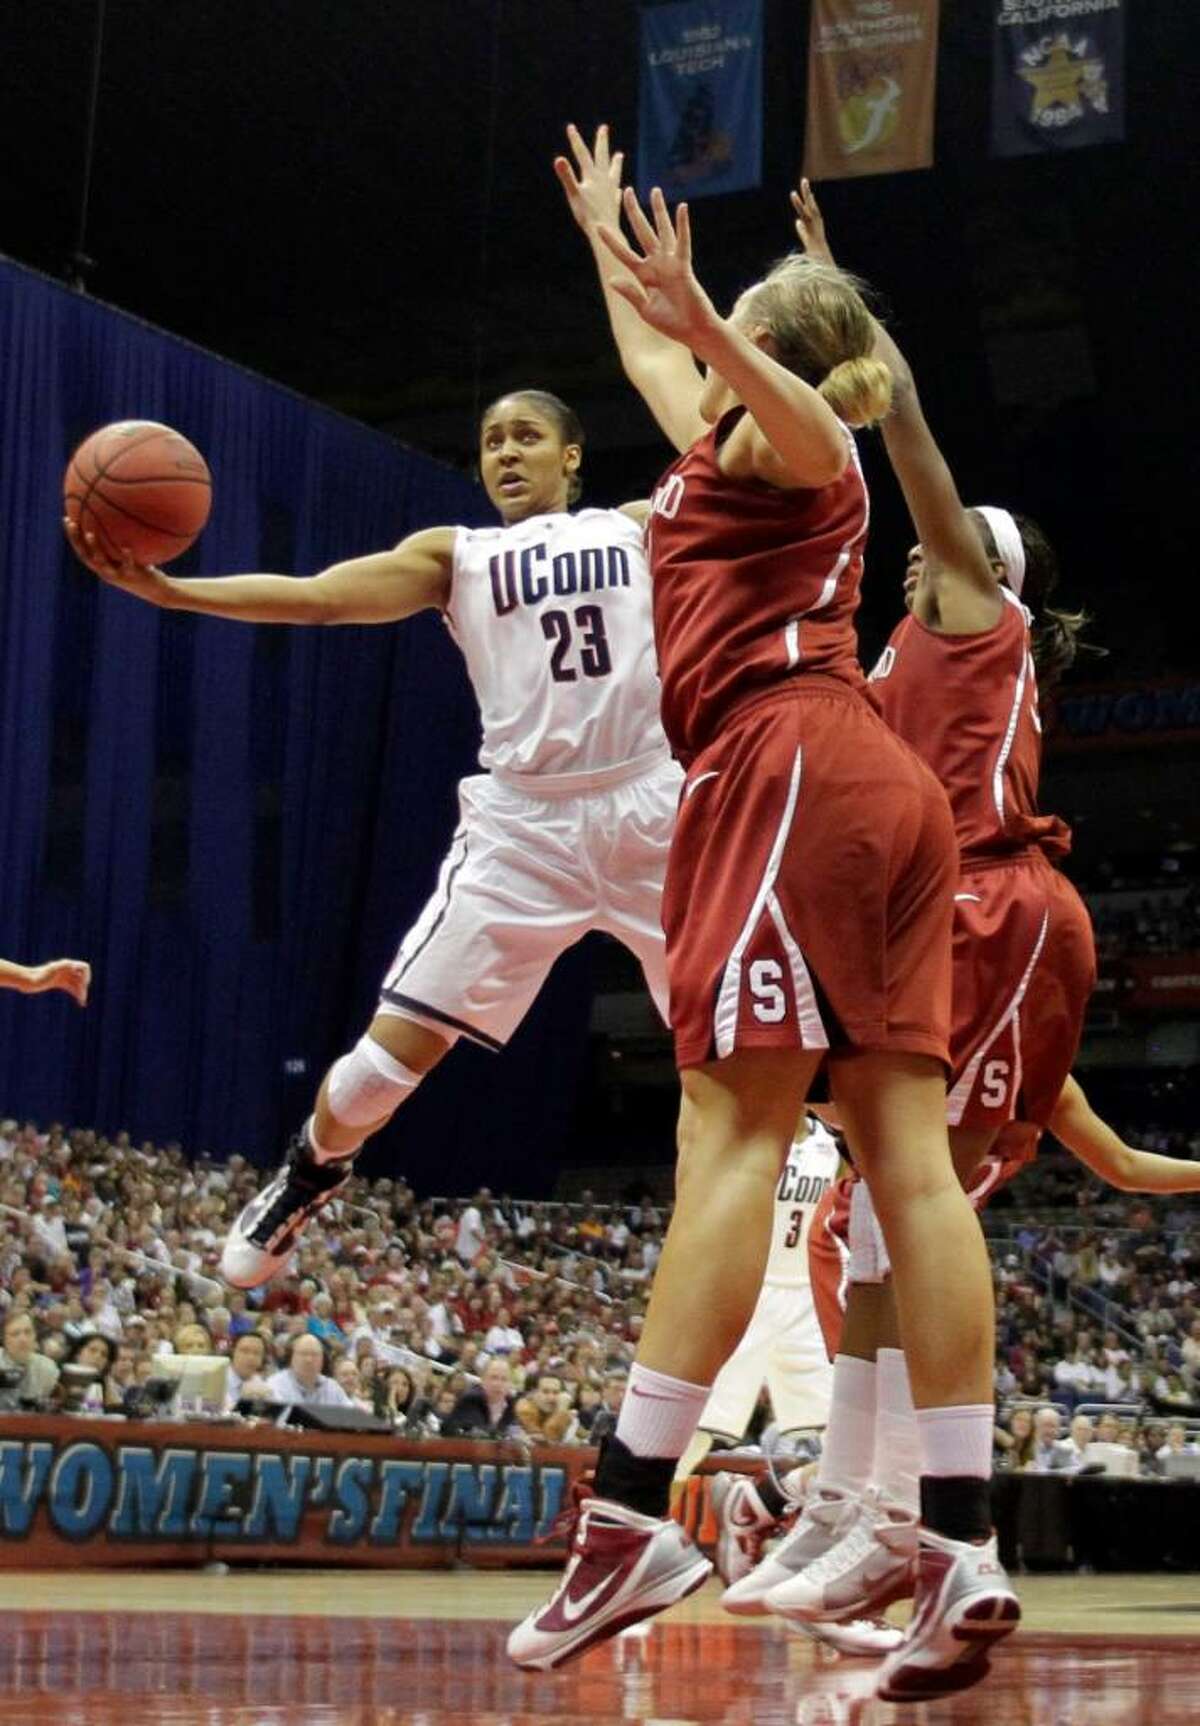 Connecticut's Maya Moore (23) attempts a shot over Stanford's Jayne Appel, front, in the first half of the women's NCAA Final Four college basketball championship game Tuesday, April 6, 2010, in San Antonio. (AP Photo/Eric Gay)